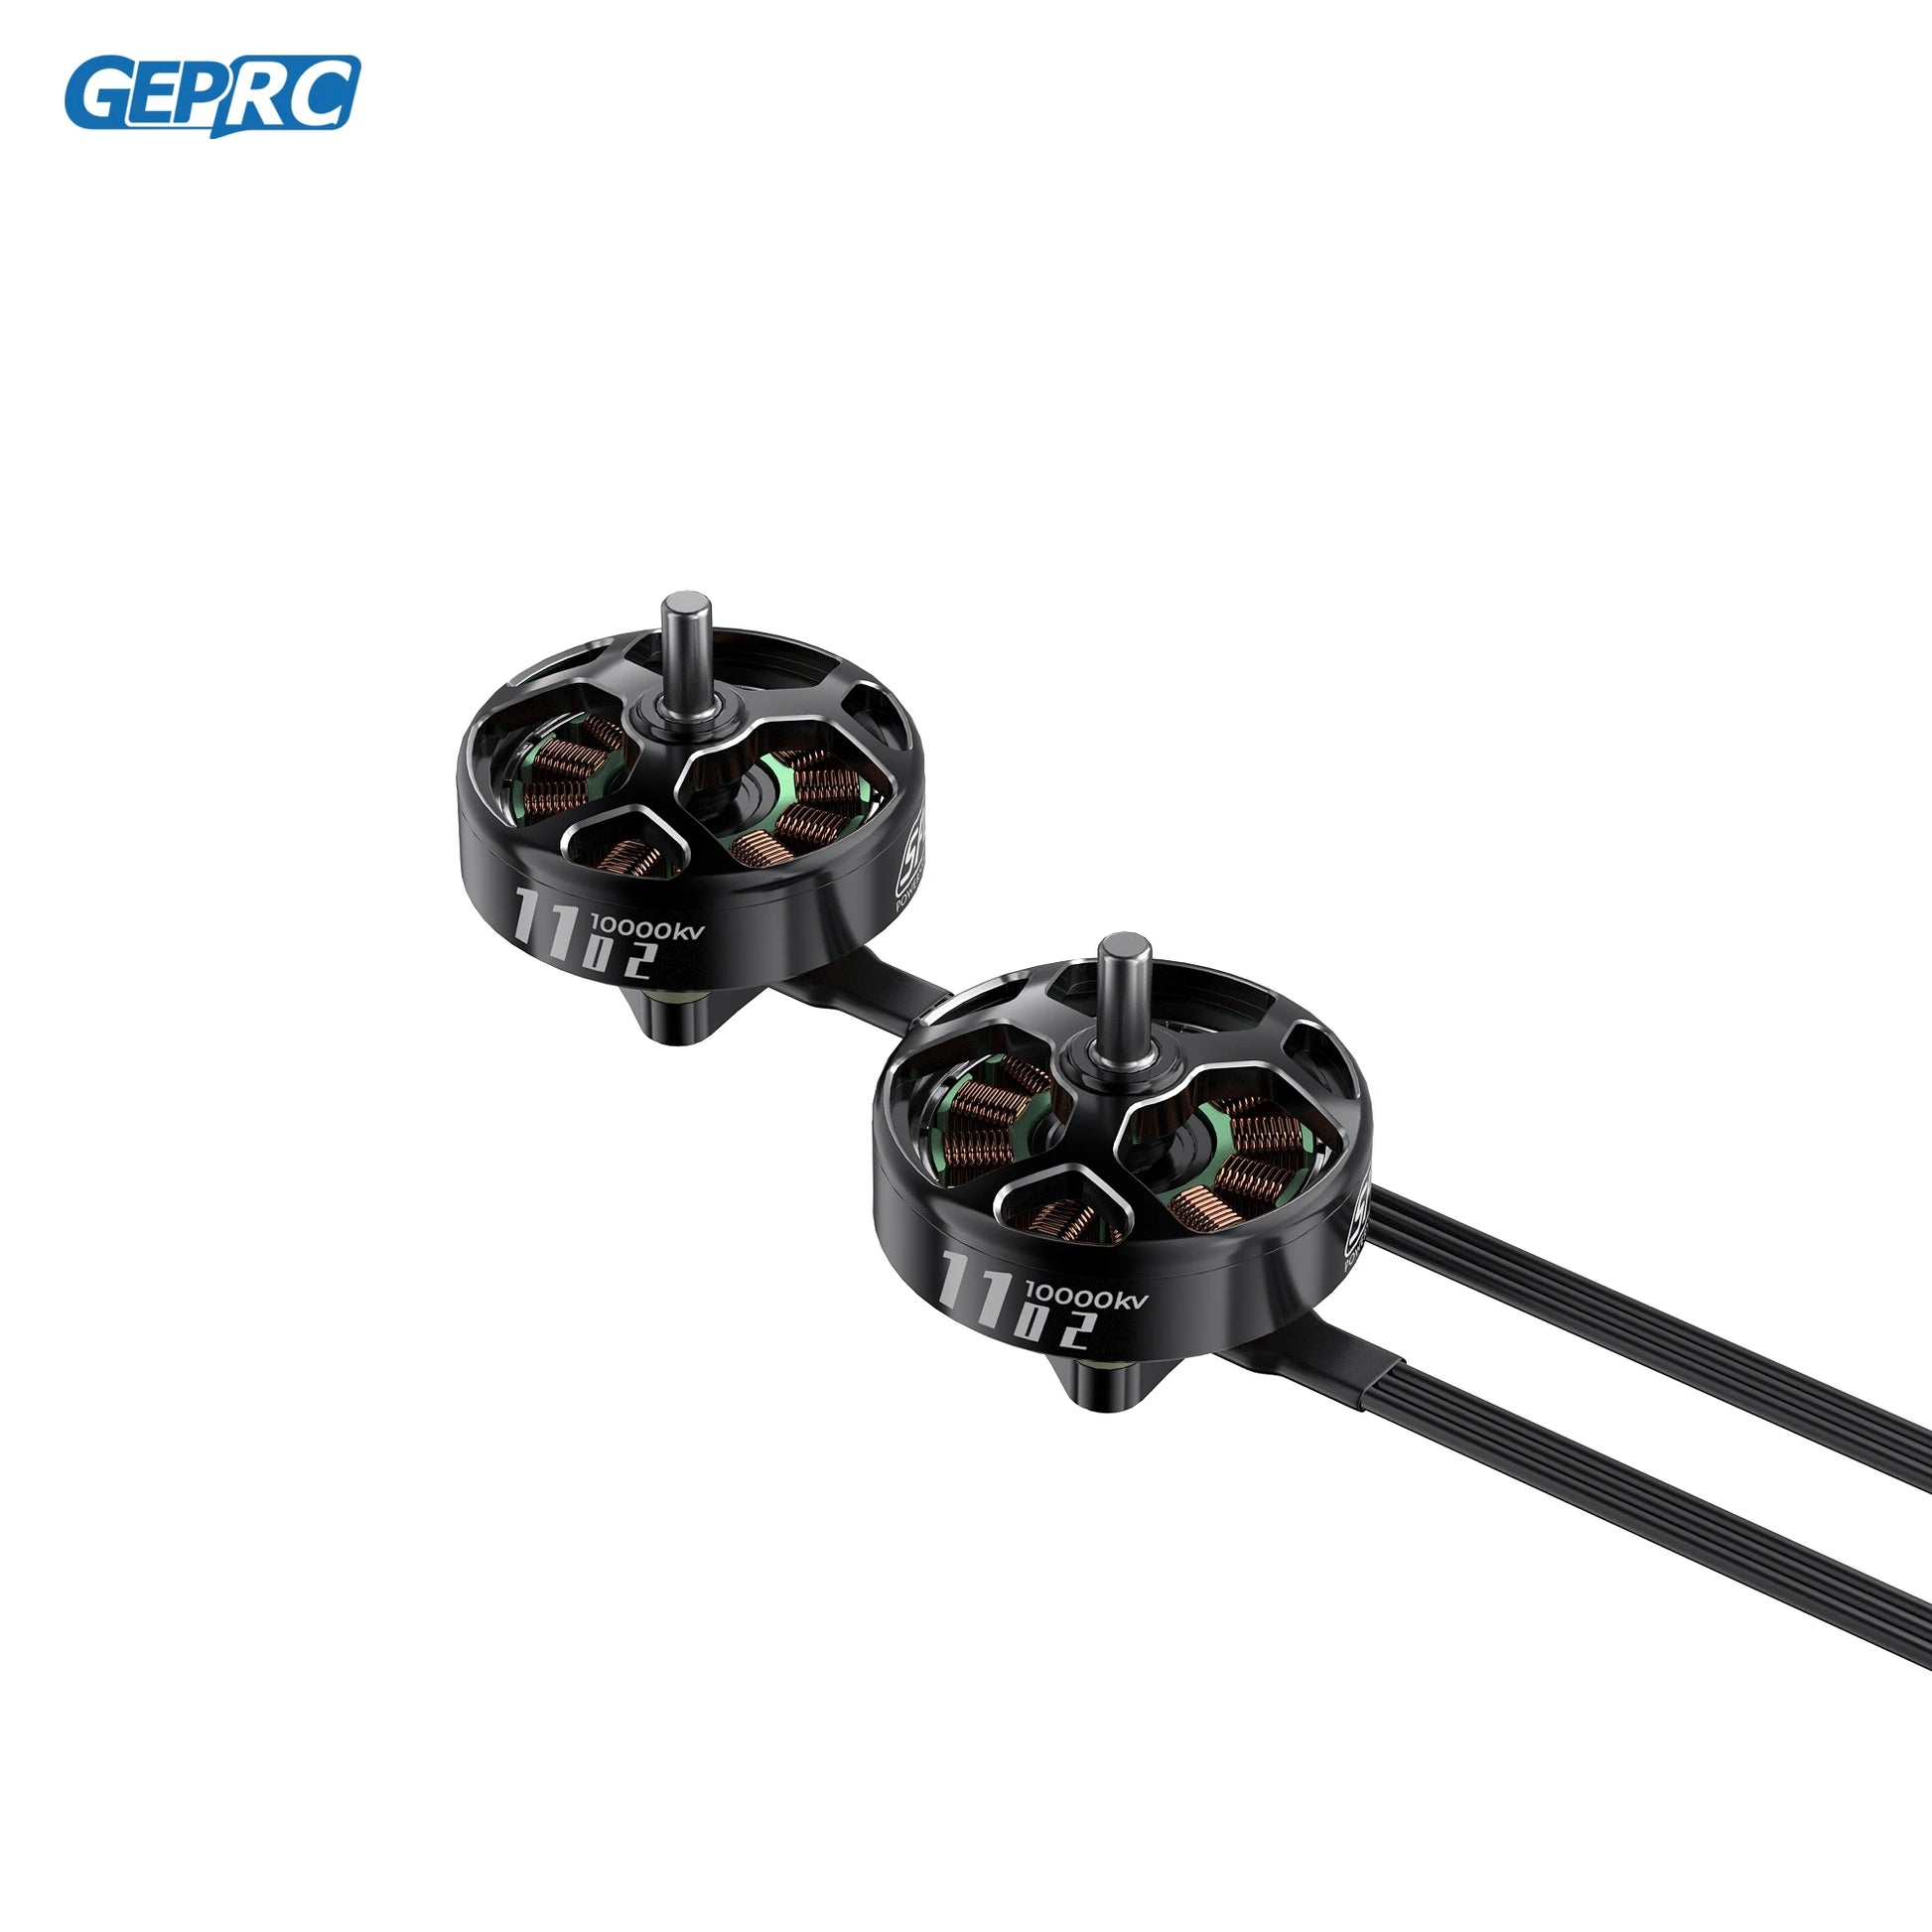 GEPRC SPEEDX2 1102 10000KV Motor - ESC 12A Brushless Motor Black with Mini 1.6 -2 Inch RC FPV Racing Drone Multicopter Accessories